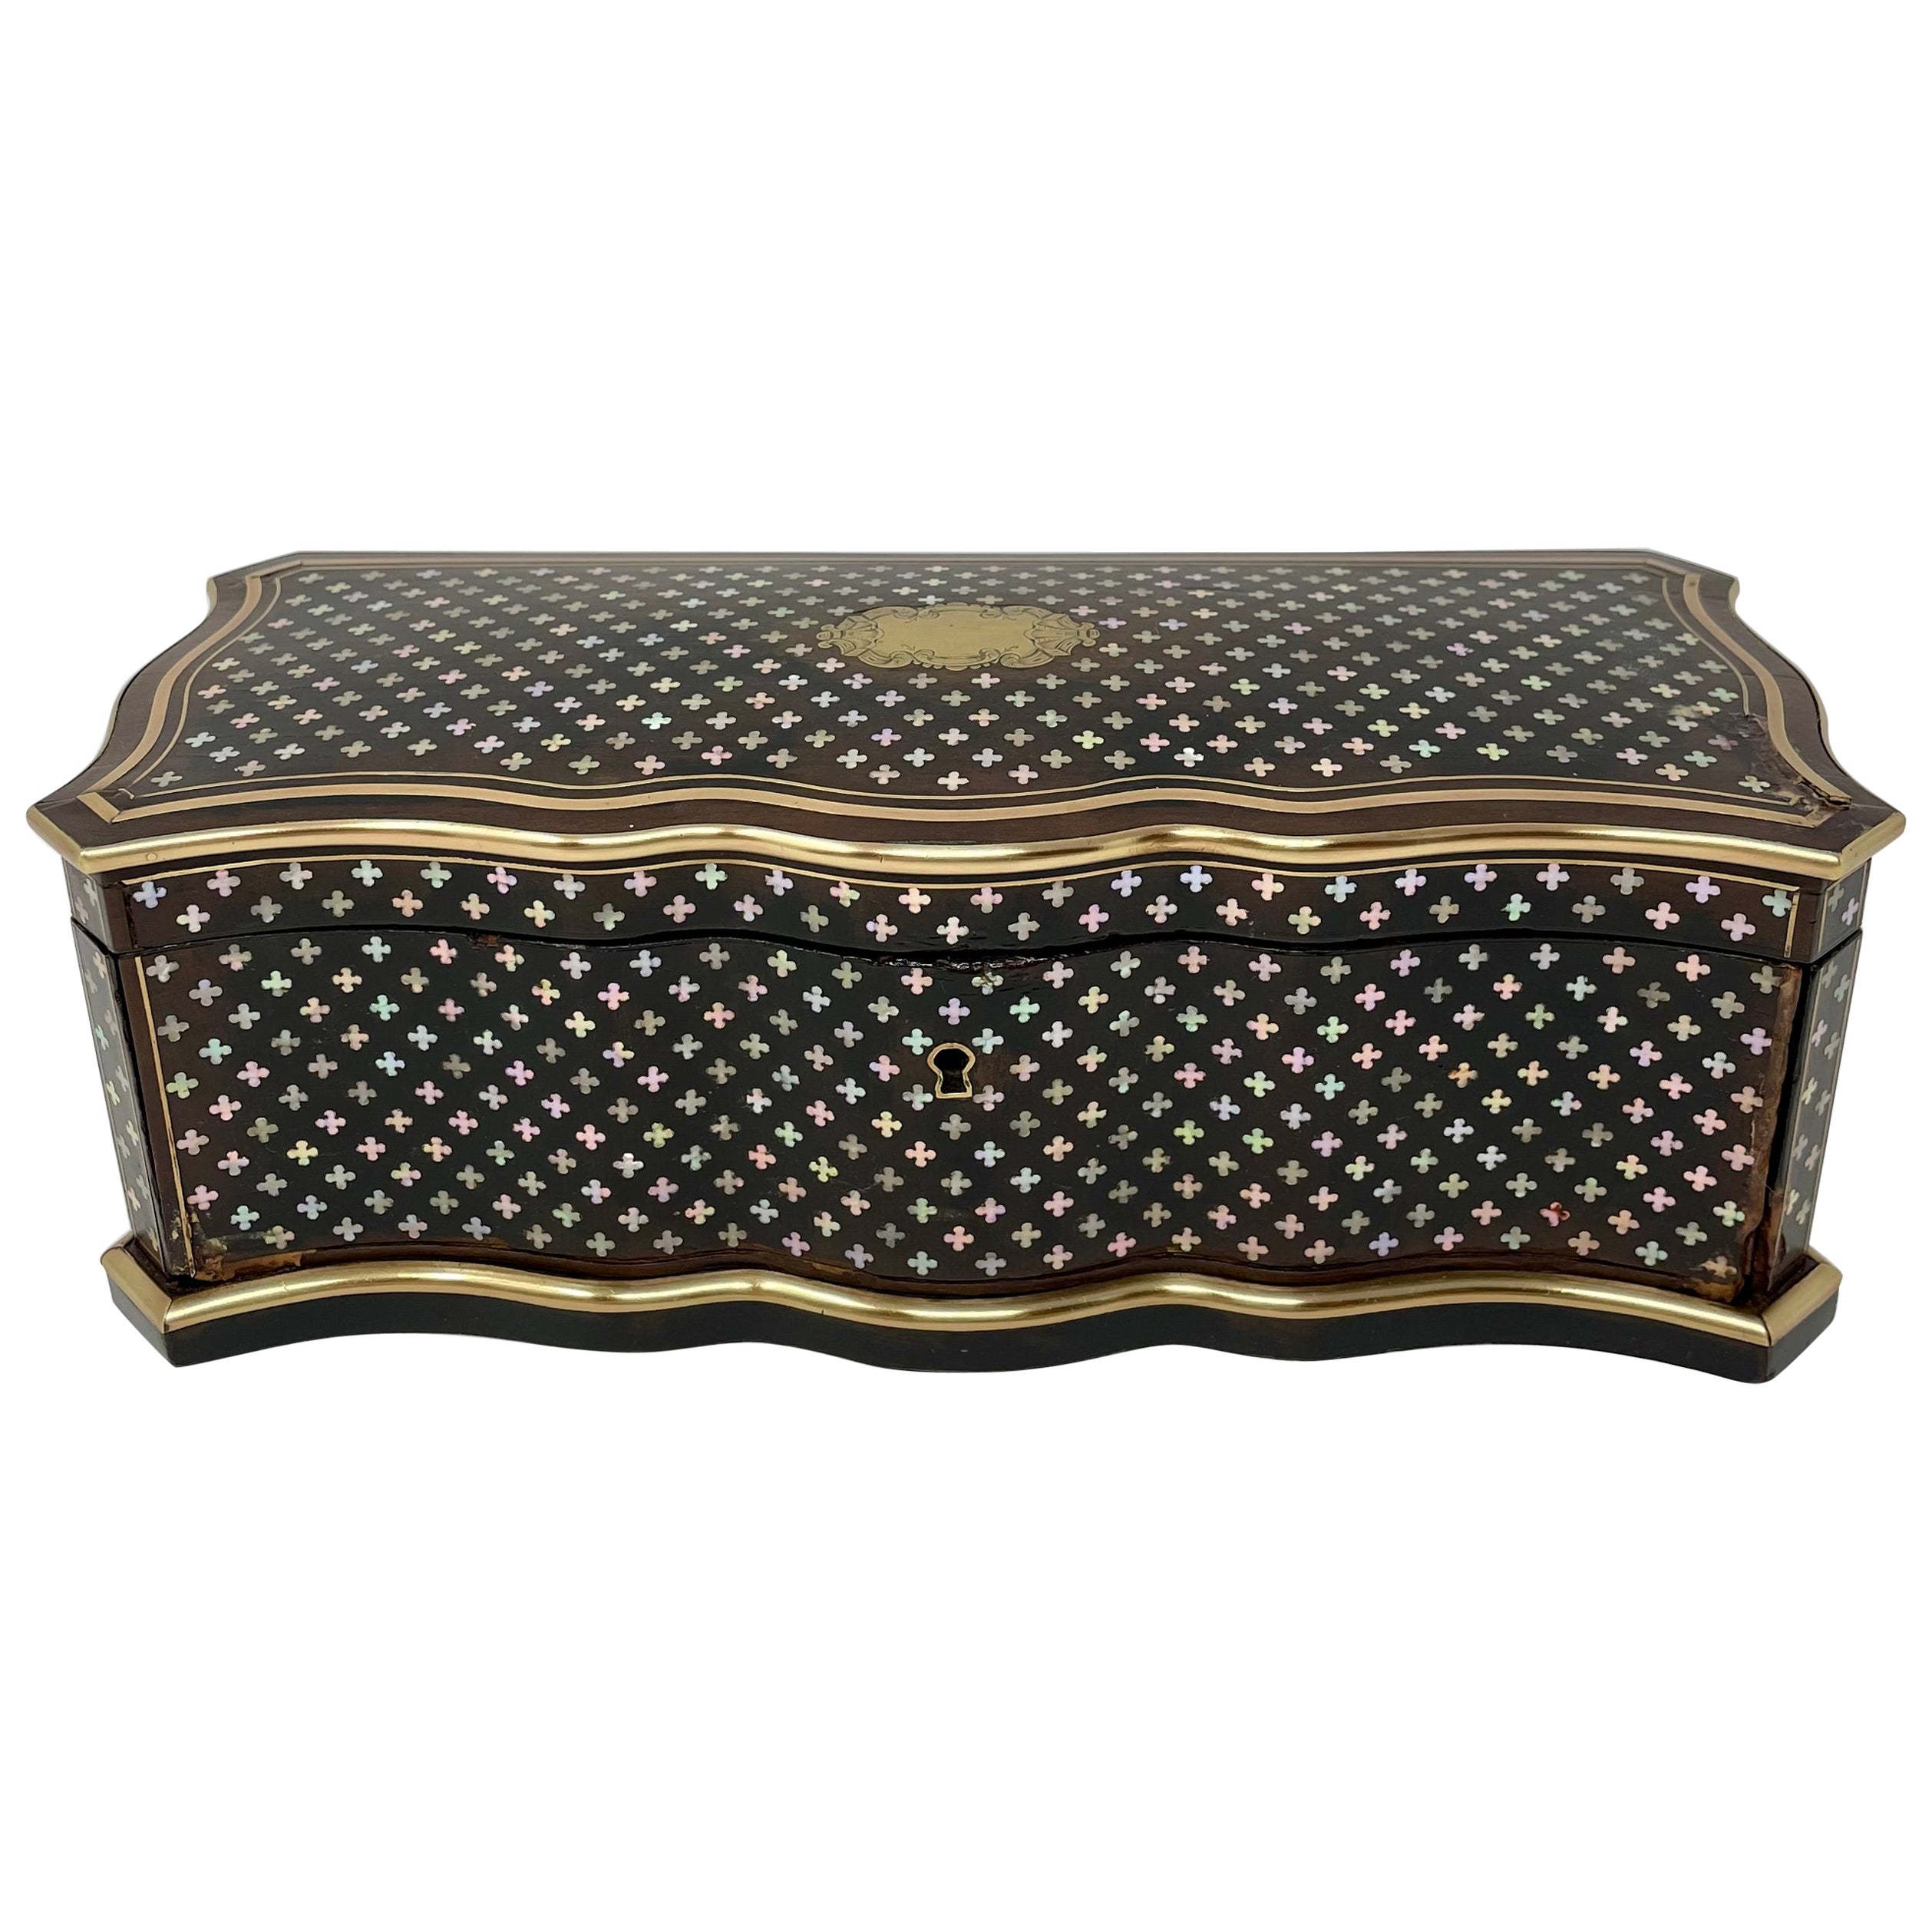 Antique 19th Century French "Glove Box" Inlayed with Mother-of-Pearl.